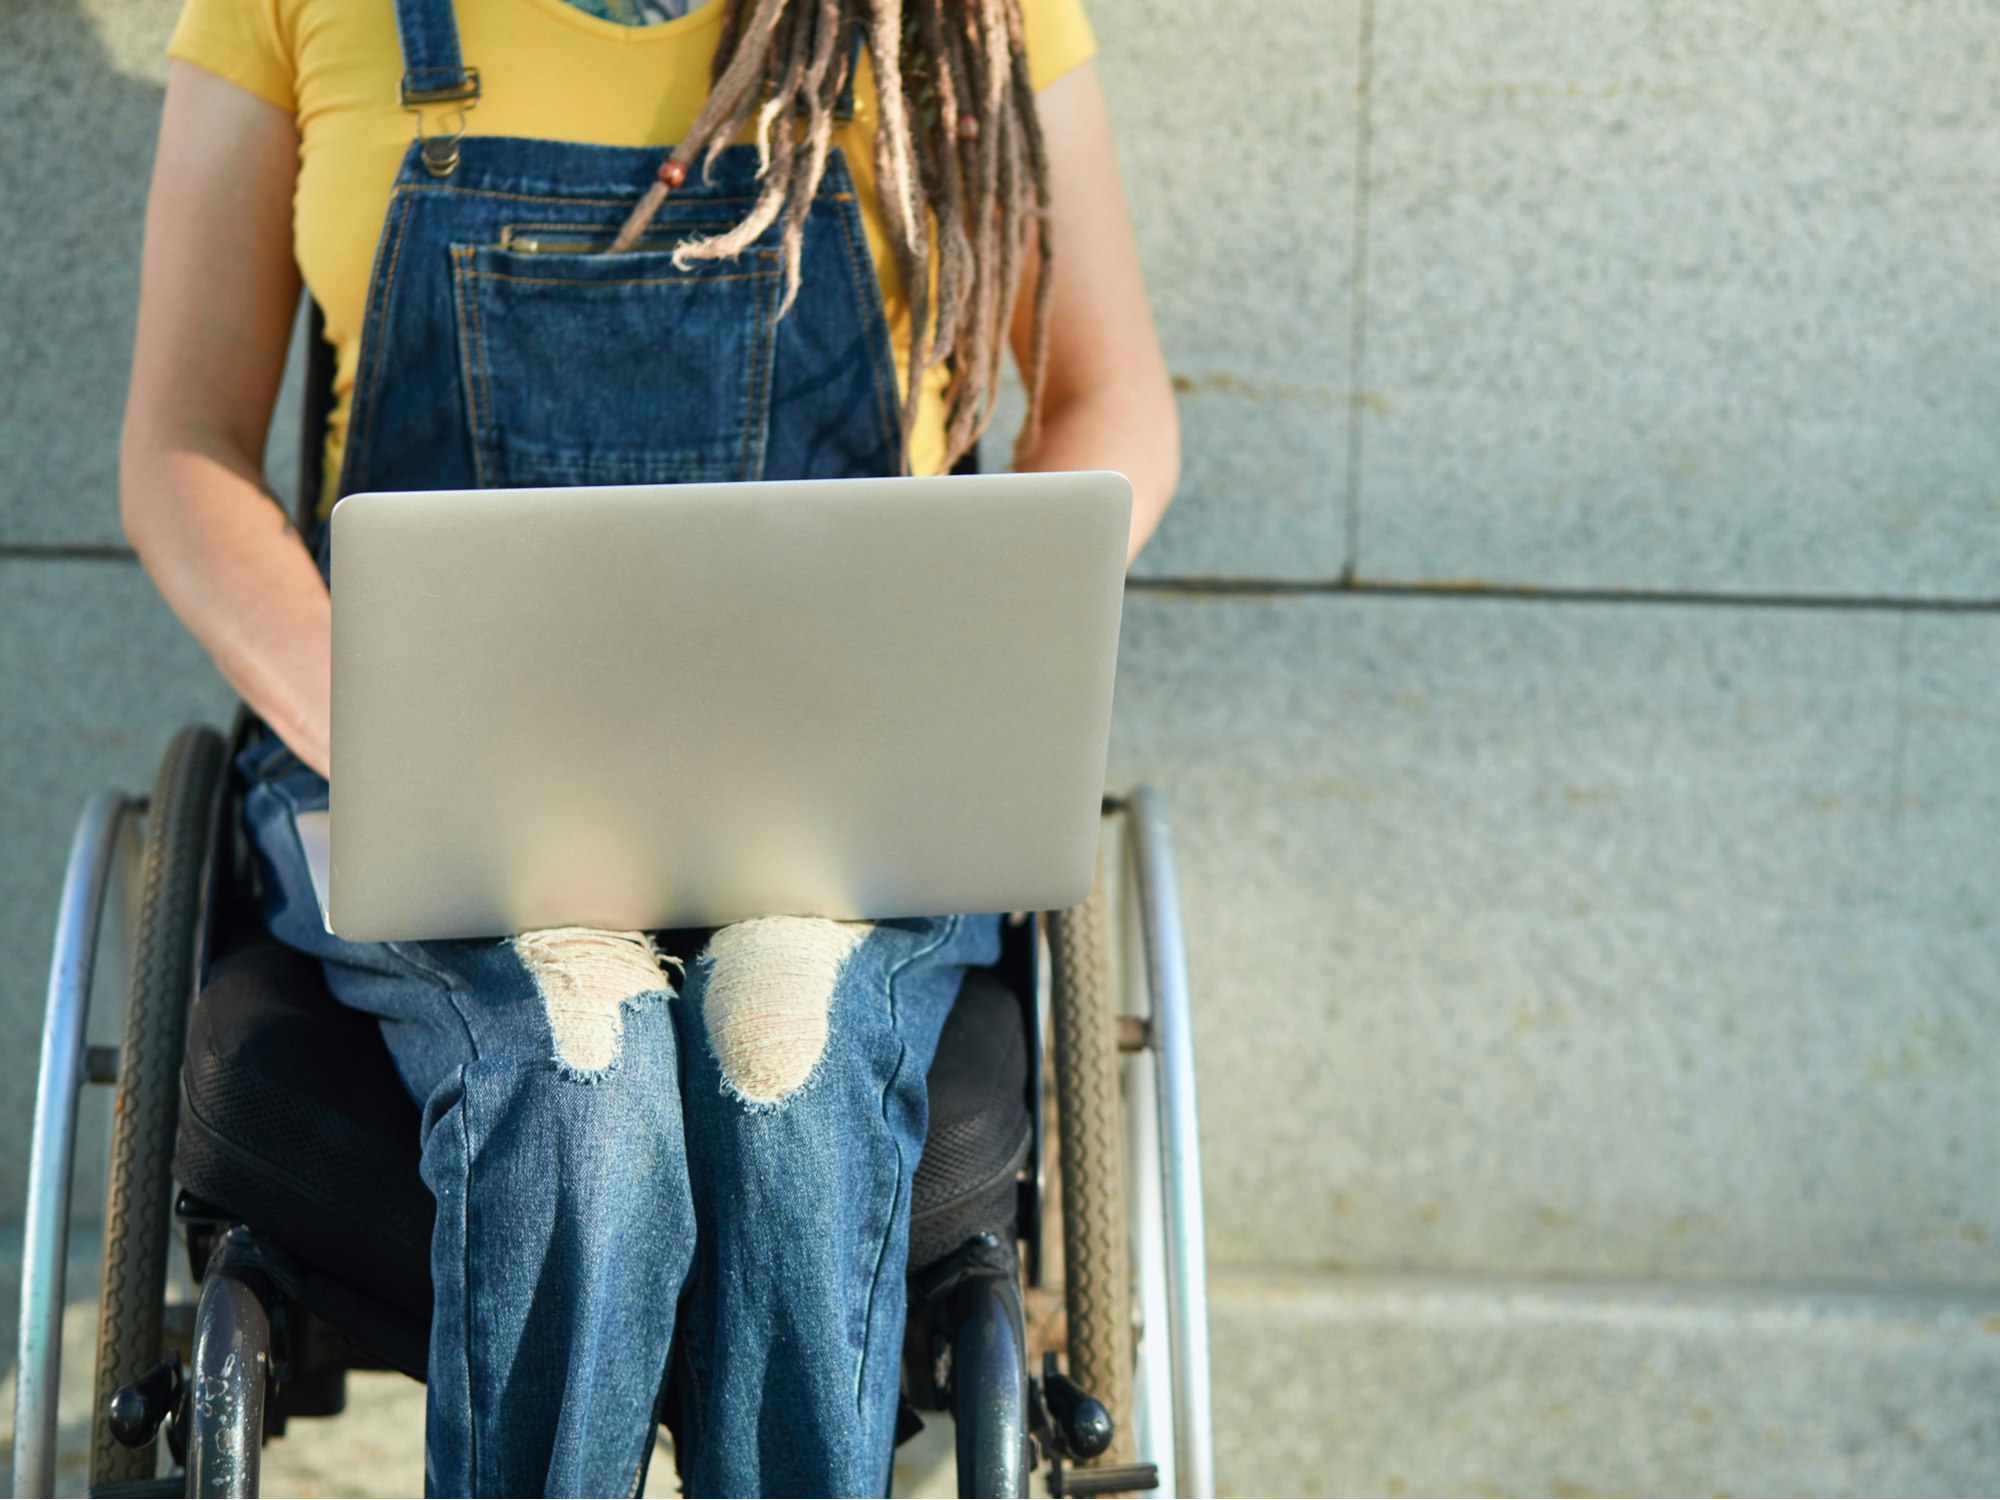 Participation of disabled women as citizens is at the basis of the recognition of their dignity. (Source: Shutterstock)
